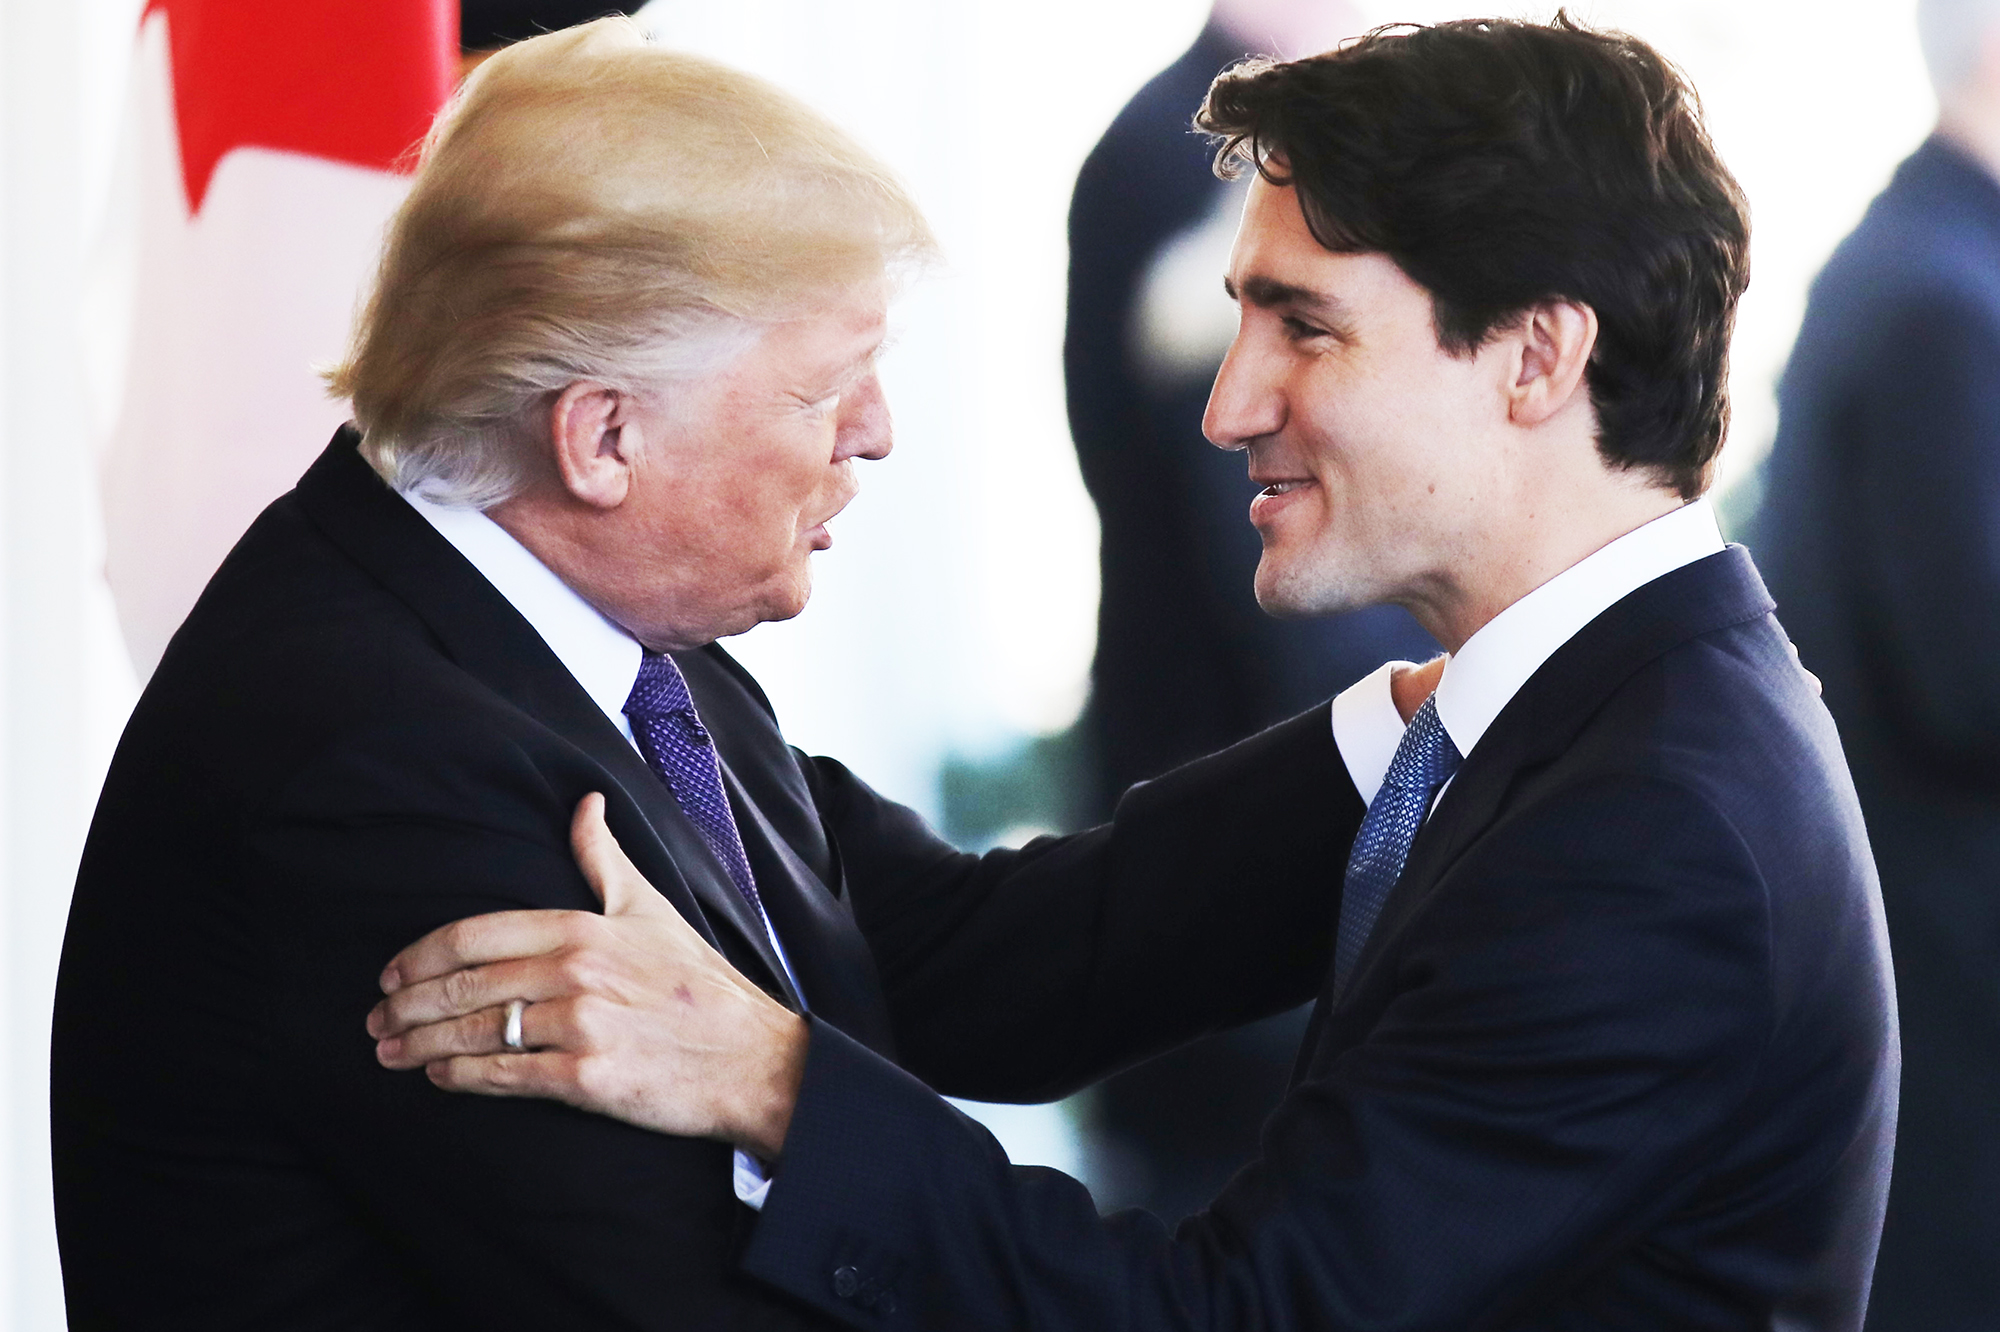 Canadian Prime Minister Trudeau is greeted by U.S. President Trump at the White House in Washington